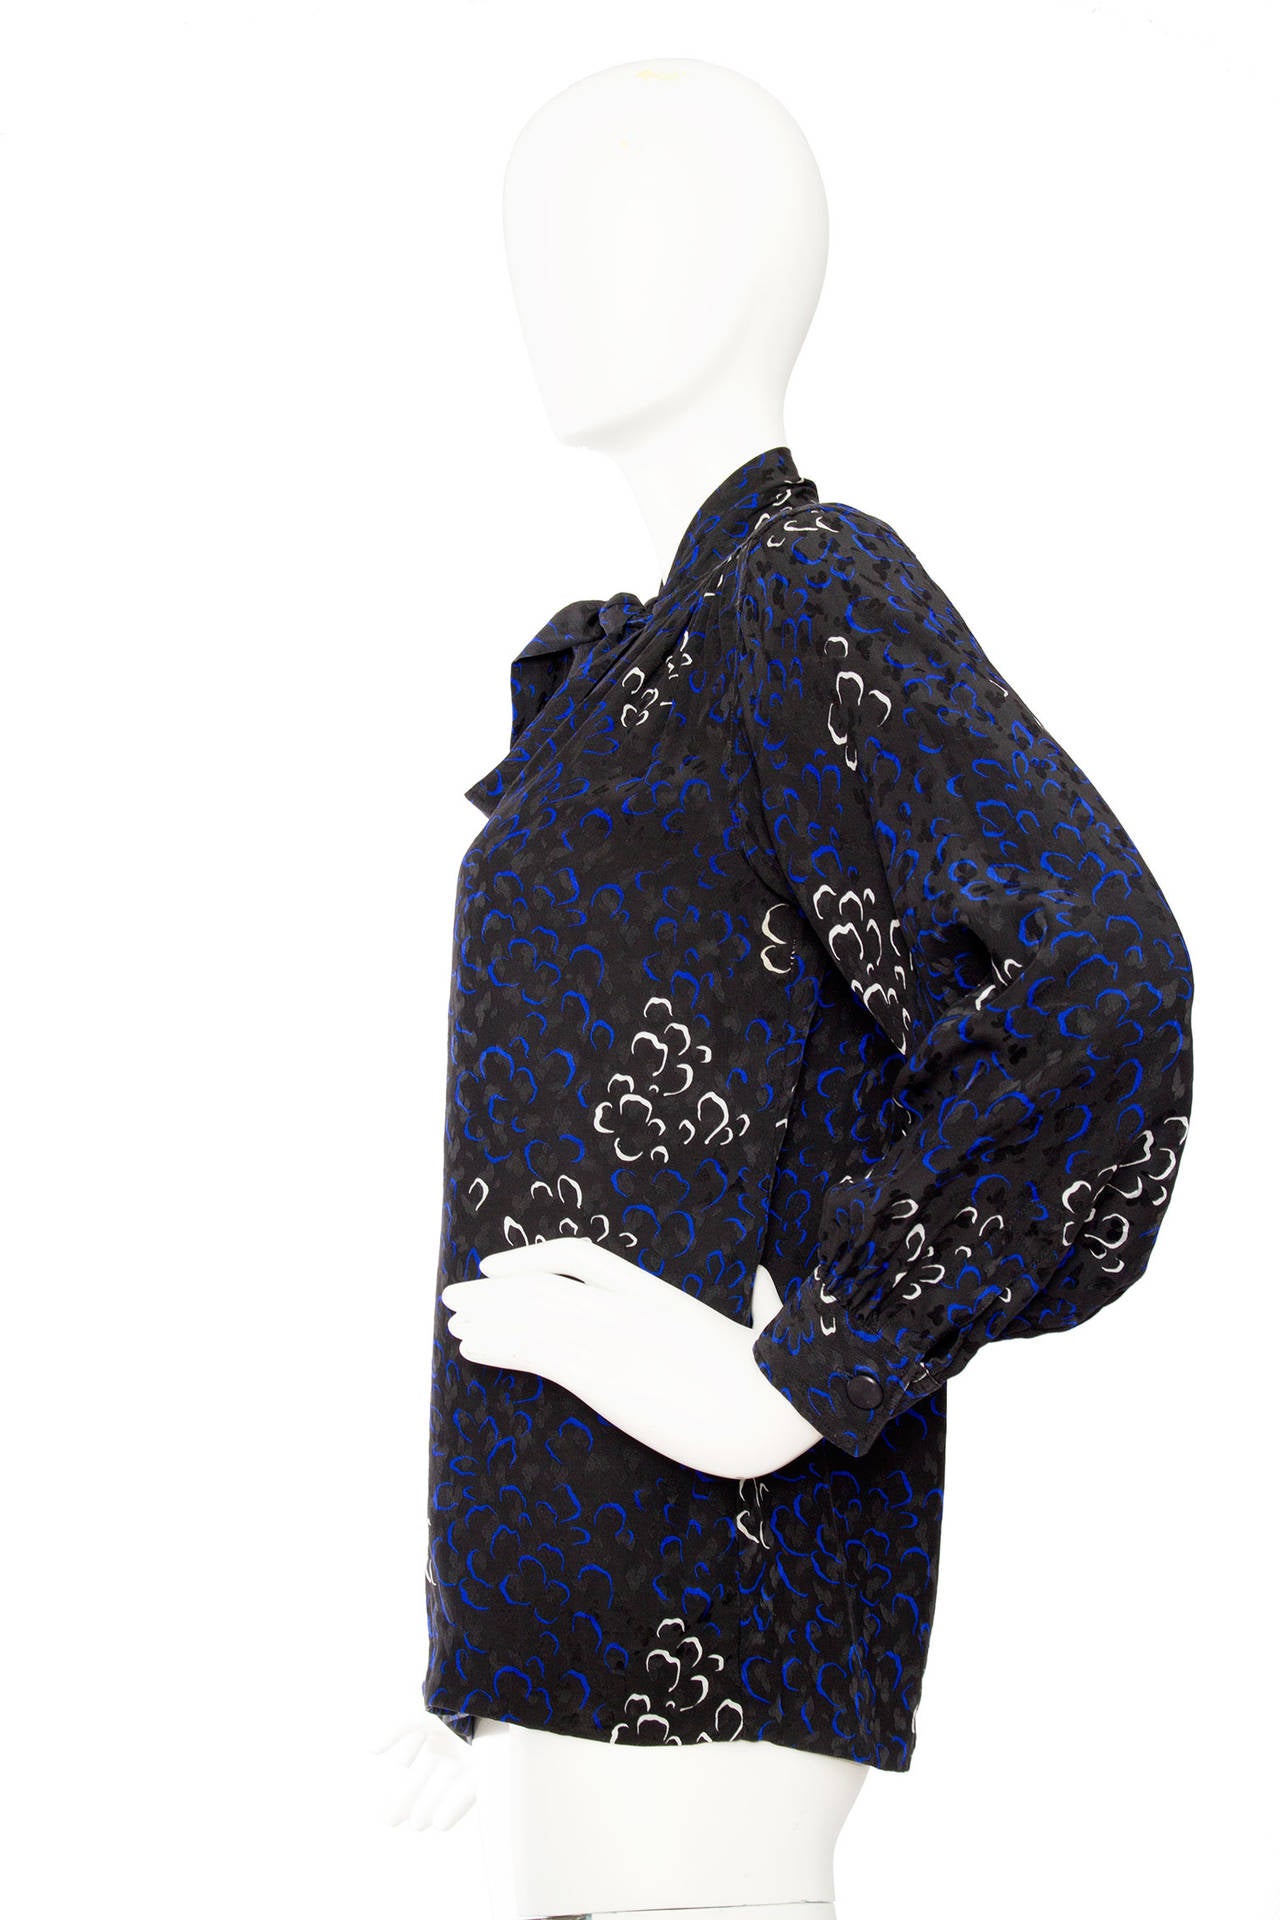 A lovely 1970s Yves Saint Laurent jacquard woven silk blouse with an allover abstract flower print in white and blue. The blouse has a tie collar and one buttoned cuffs and a button down front. 

The size of the blouse corresponds to that of a